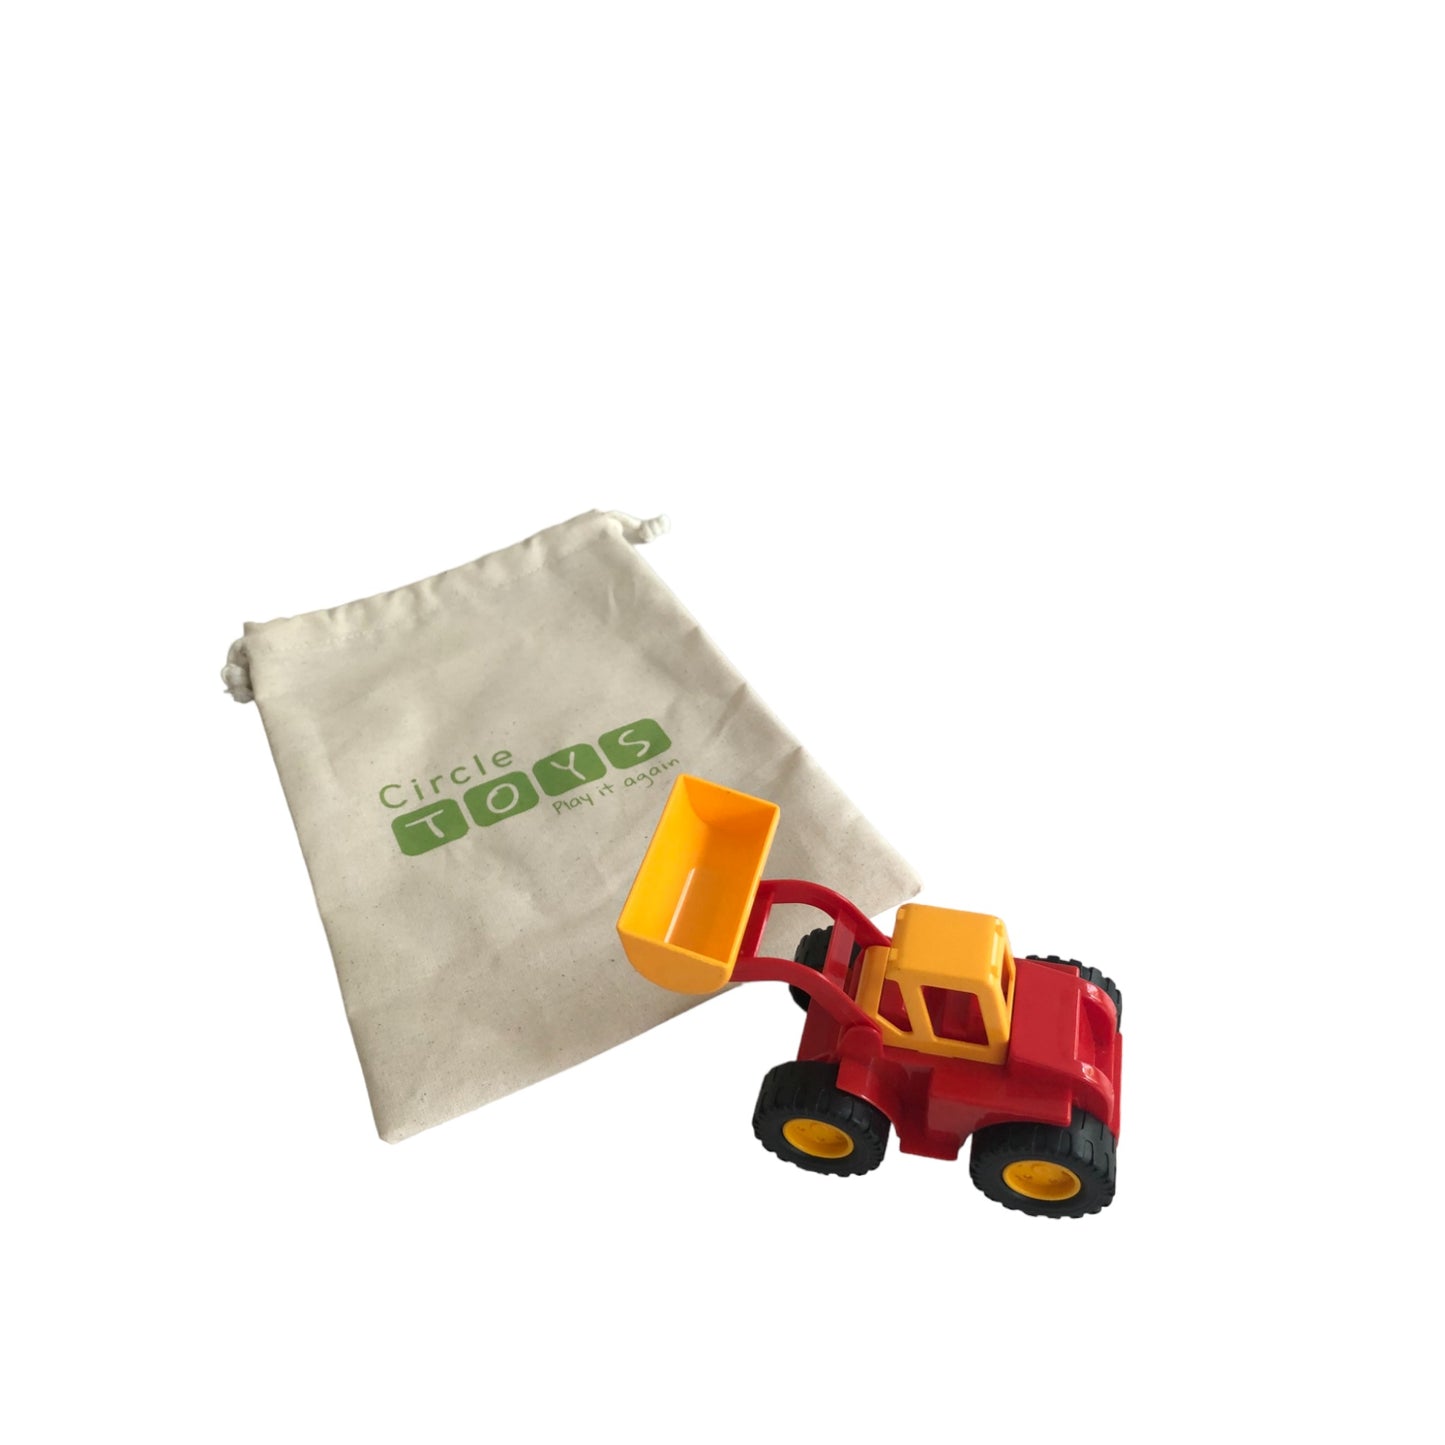 Compact Tractor Toy with Shovel